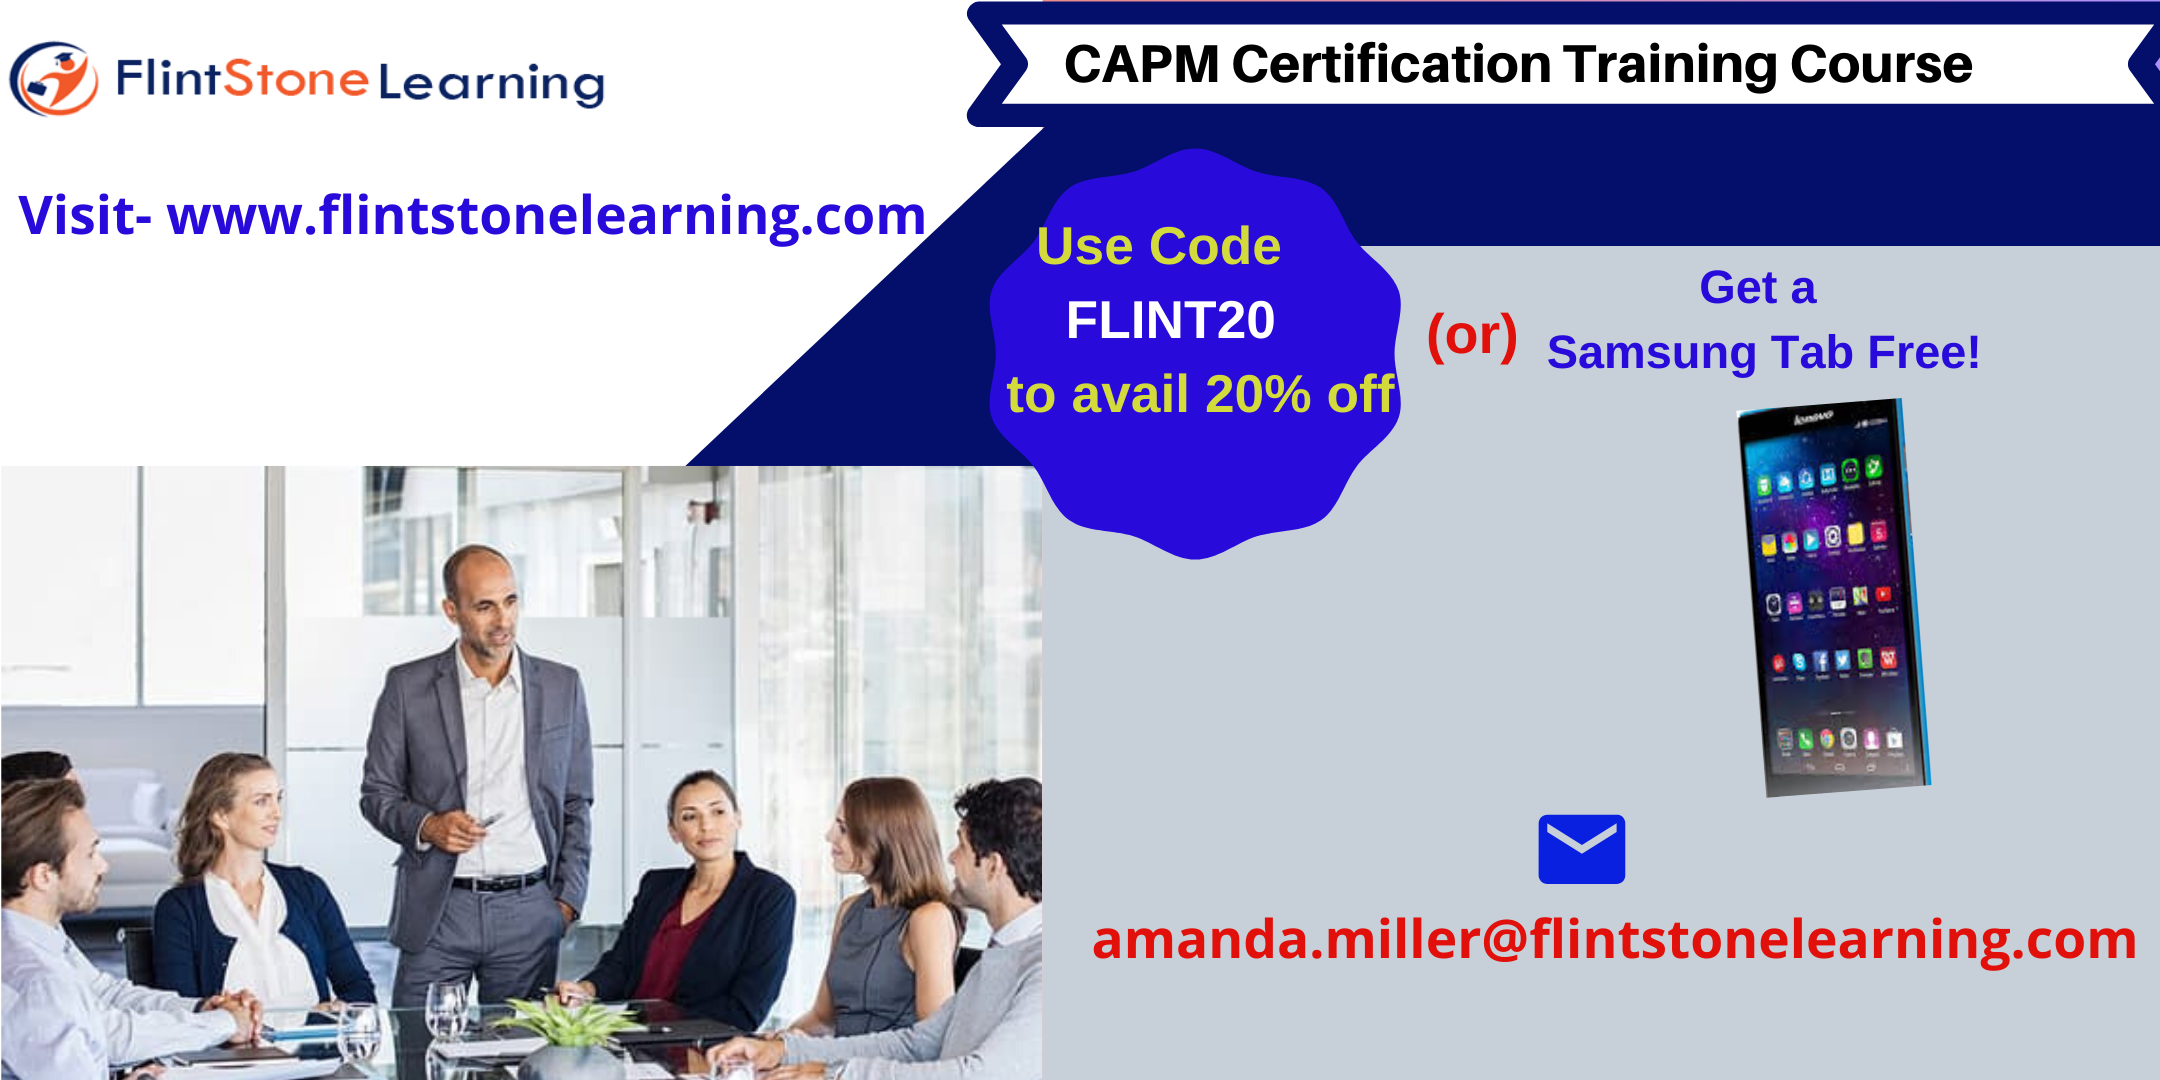 CAPM Certification Training Course in East Los Angeles, CA